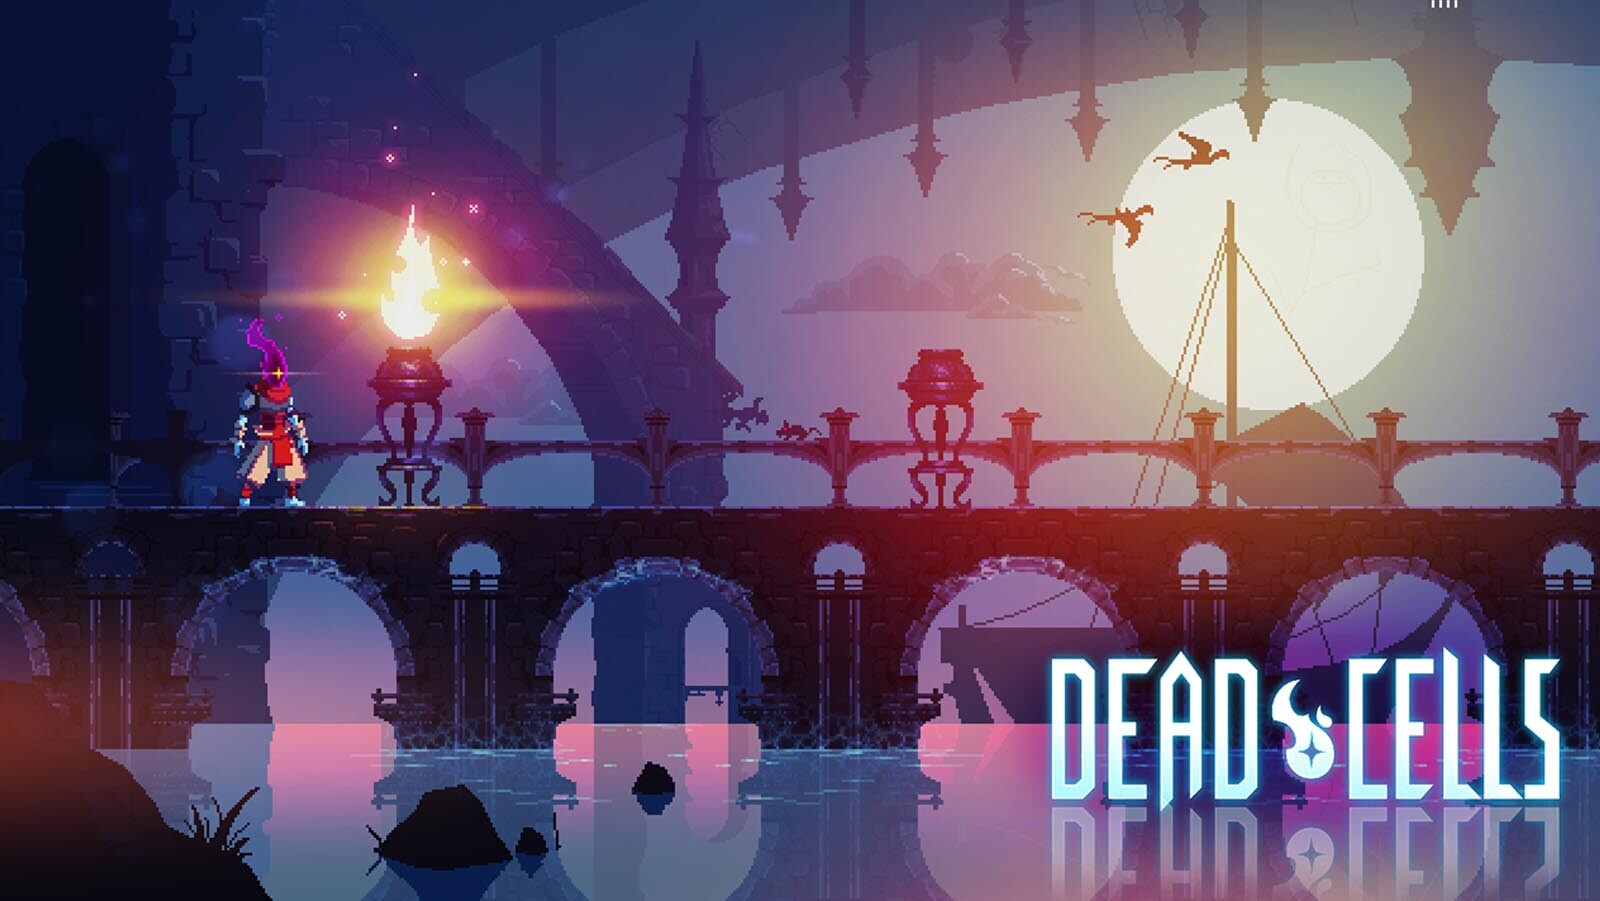 download the new version for iphoneDead Cells